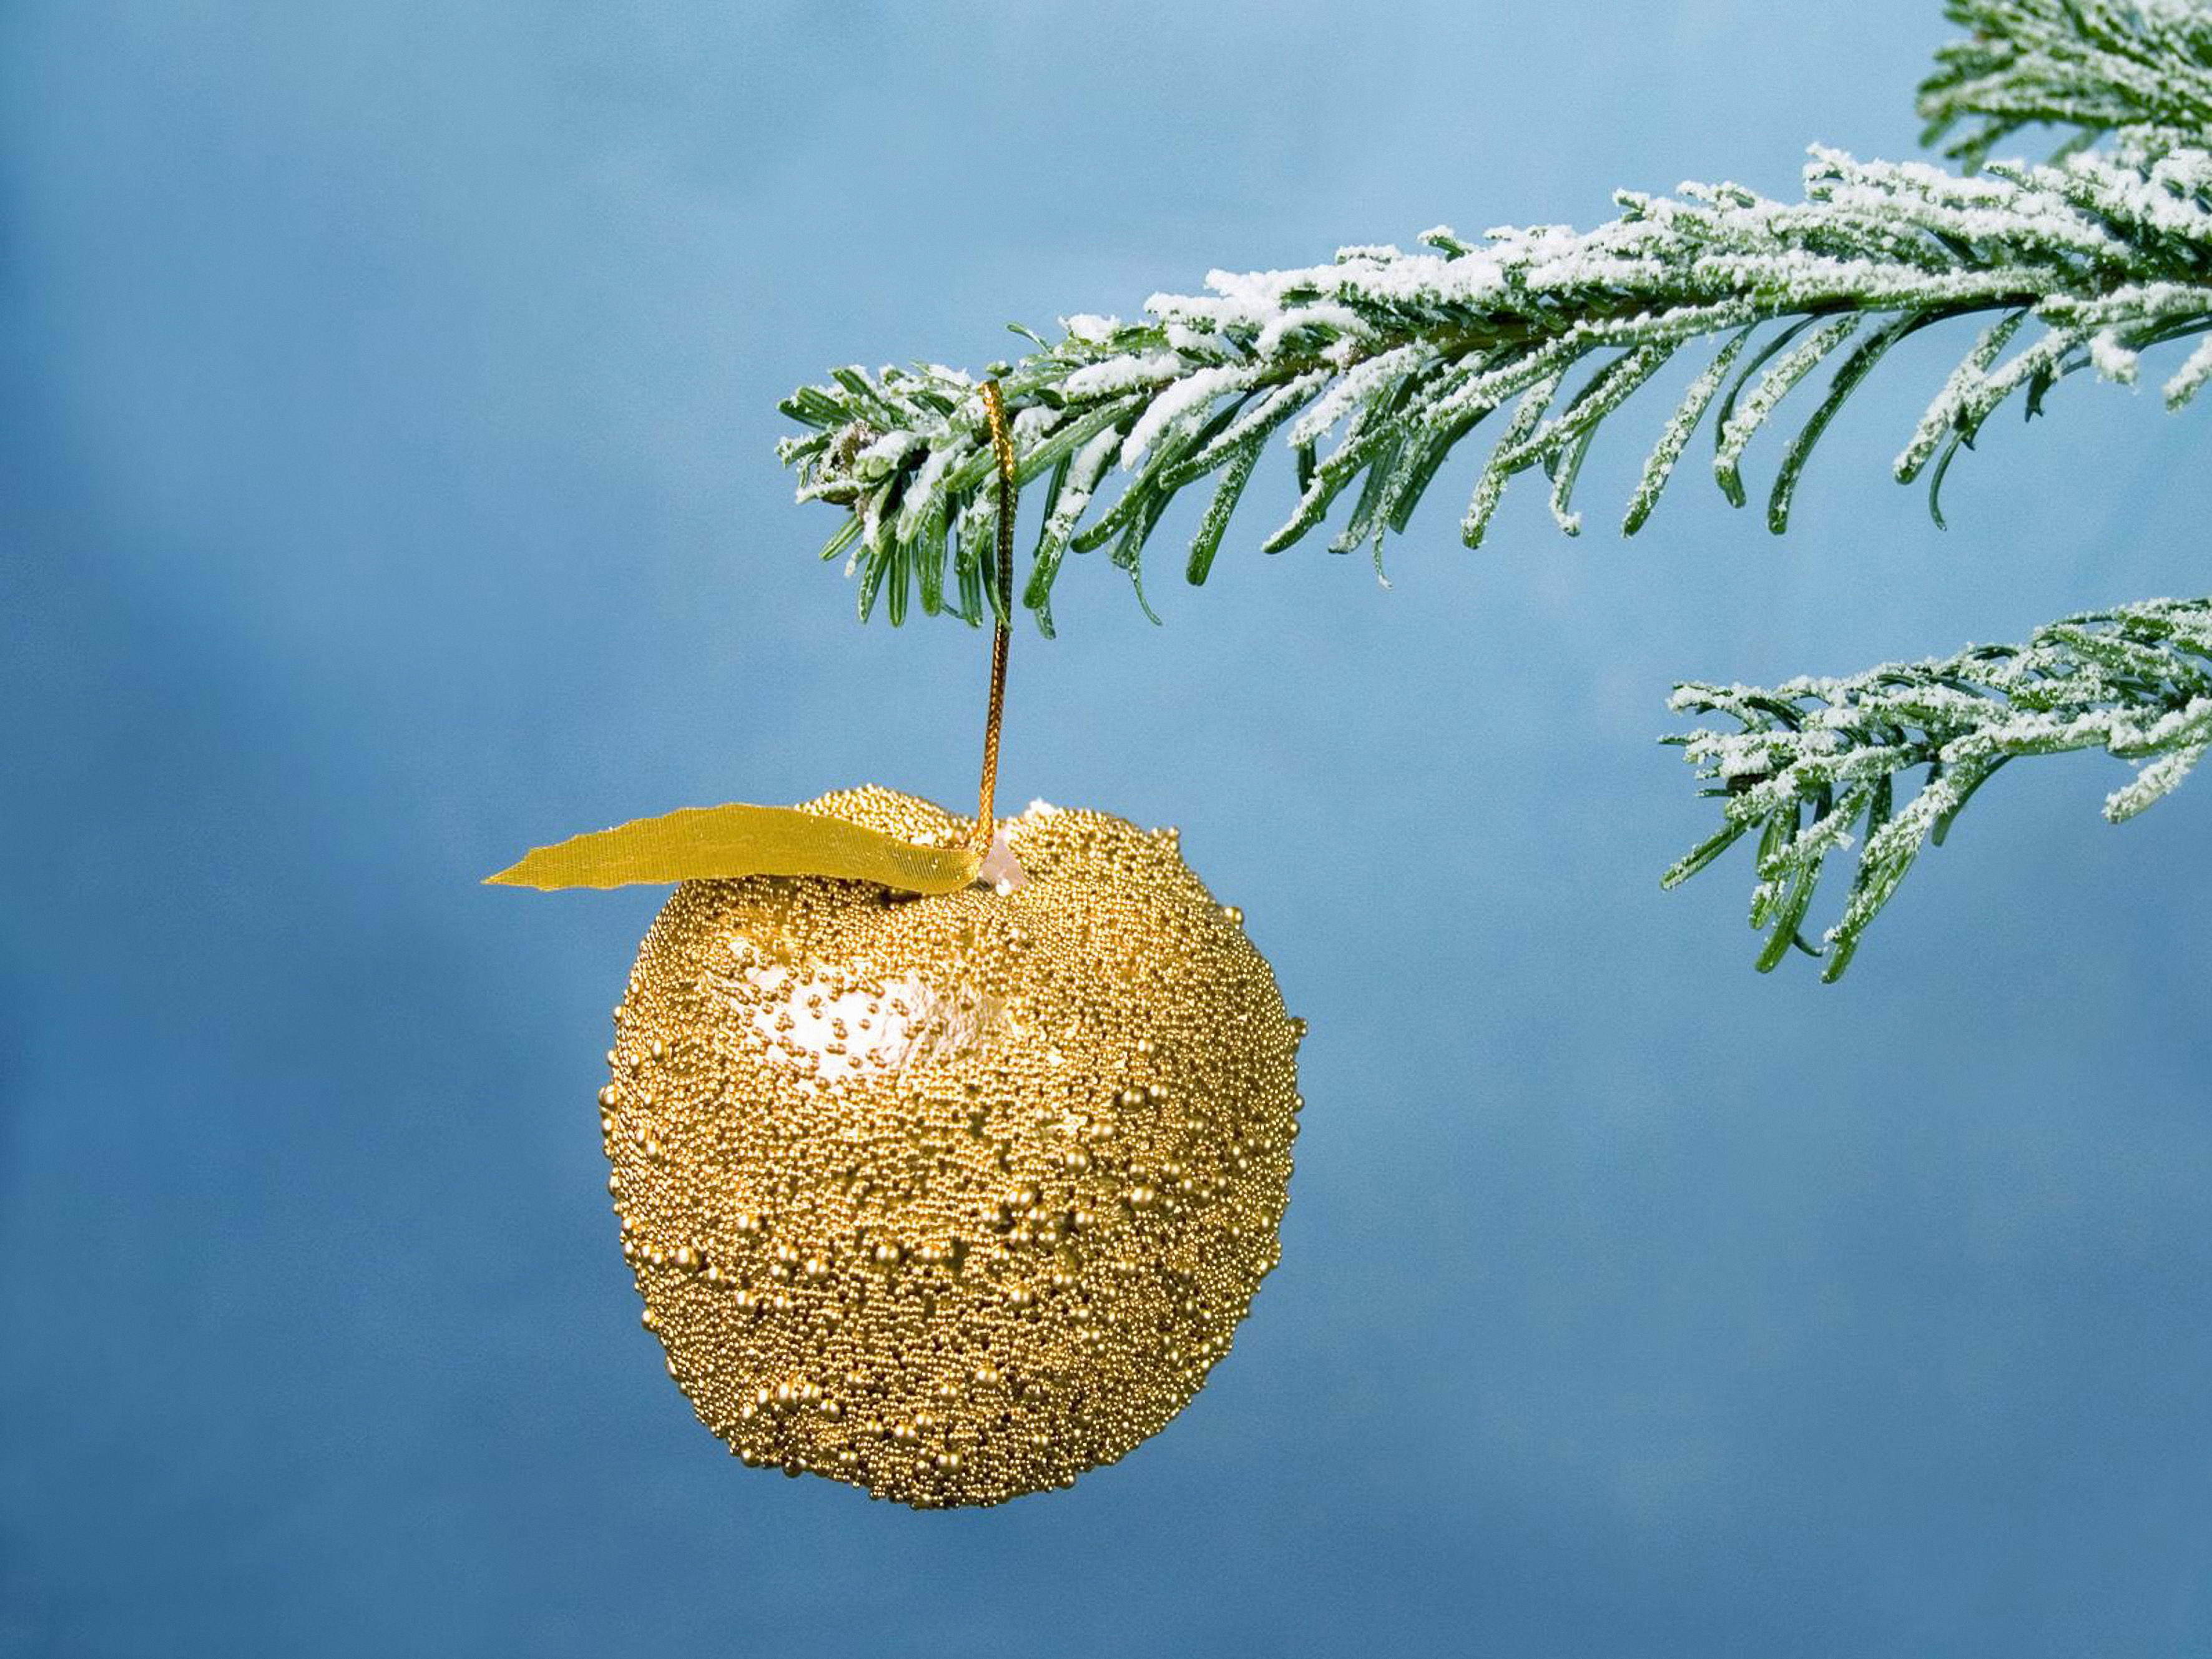 Golden Apple on the tree wallpaper and image, picture, photo